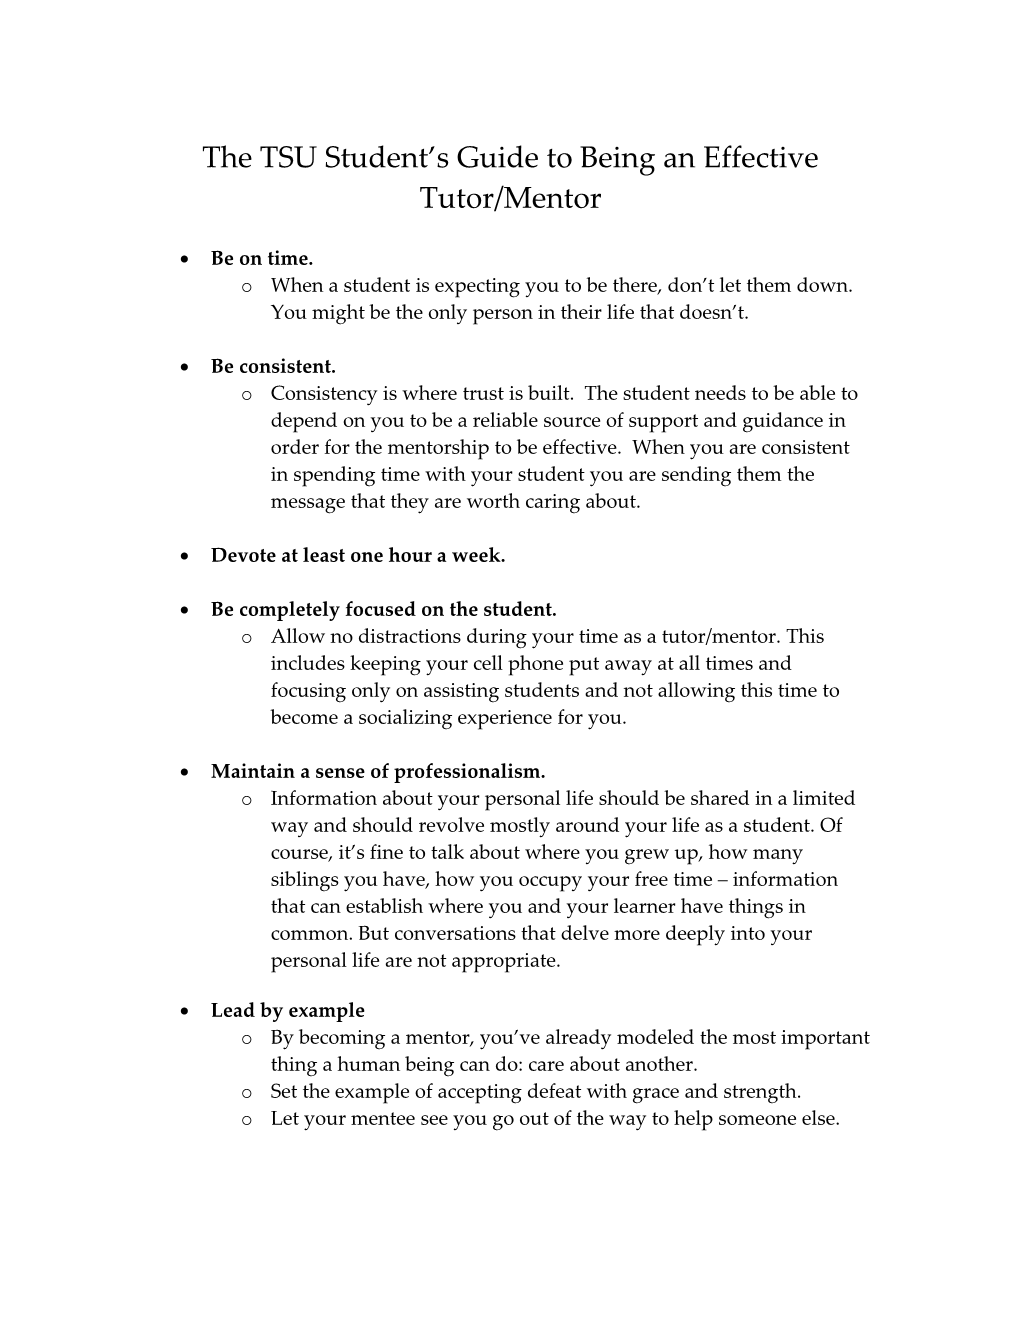 The TSU Student S Guide to Being an Effective Tutor/Mentor